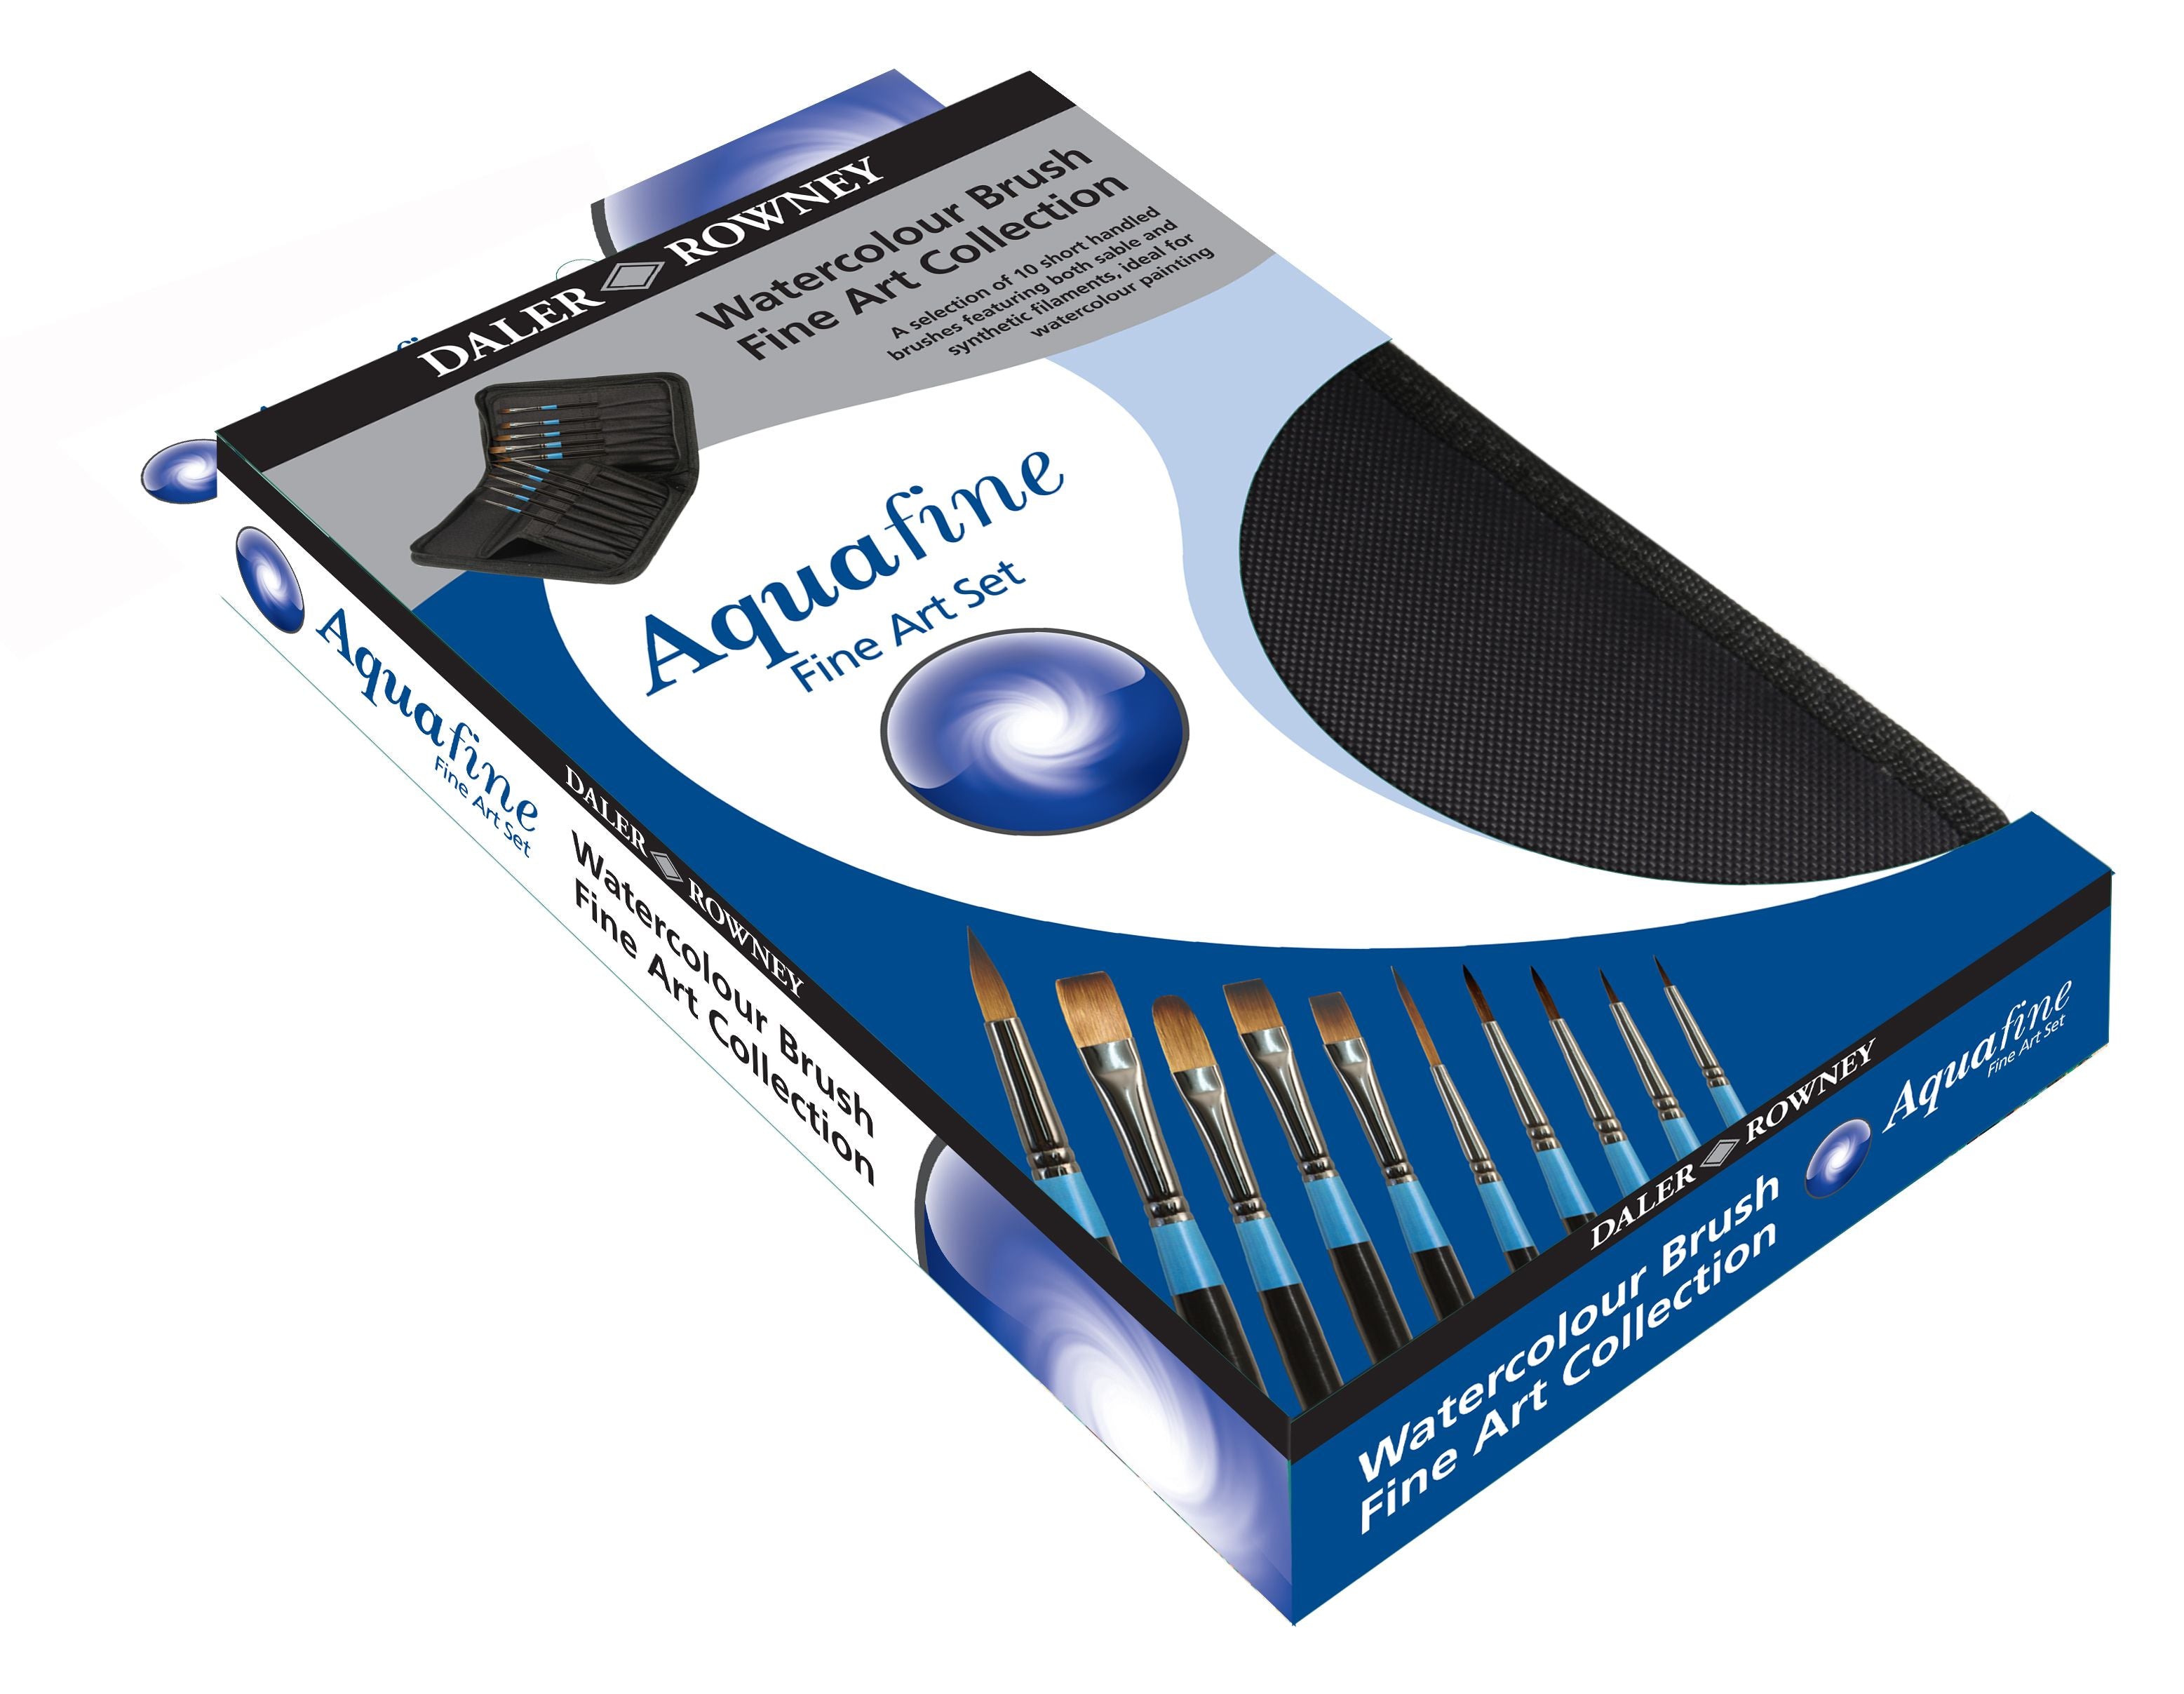 Daler Rowney Aquafine Watercolour Brush Aquafine Brushes is a comprehensive range of soft synthetic and natural hair brushes, ideal for watercolour artists